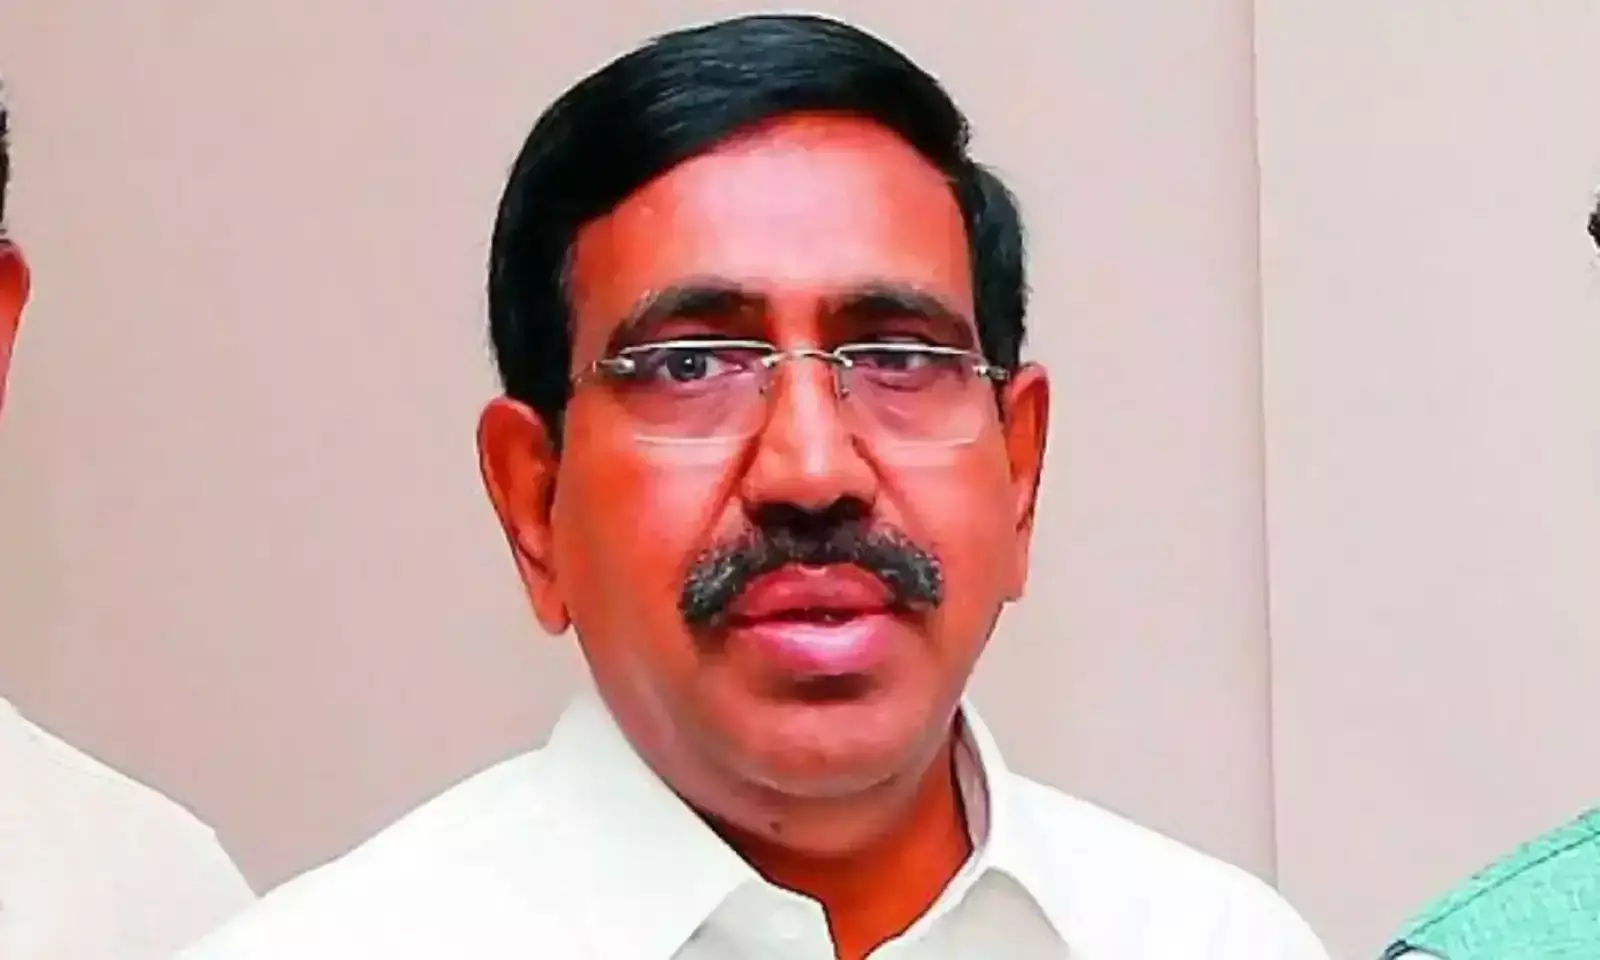 Narayana assumes charges as minister, says Amaravati construction to be completed in two years